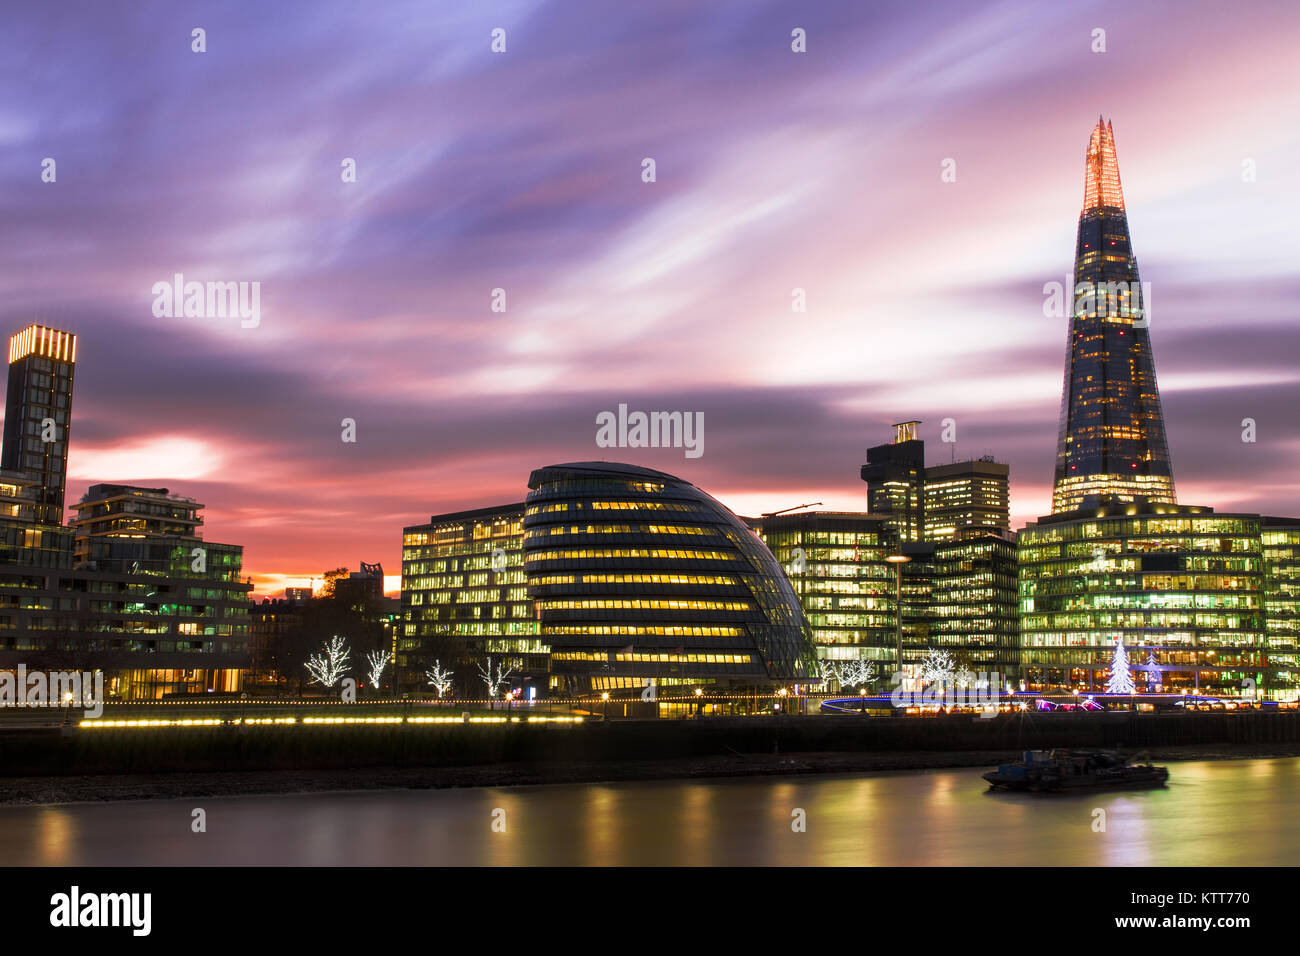 View from Tower Bridge on London Cityscape panorama at sunset over the River Thames with The Shard, London, England, United Kingdom, Europe C Stock Photo